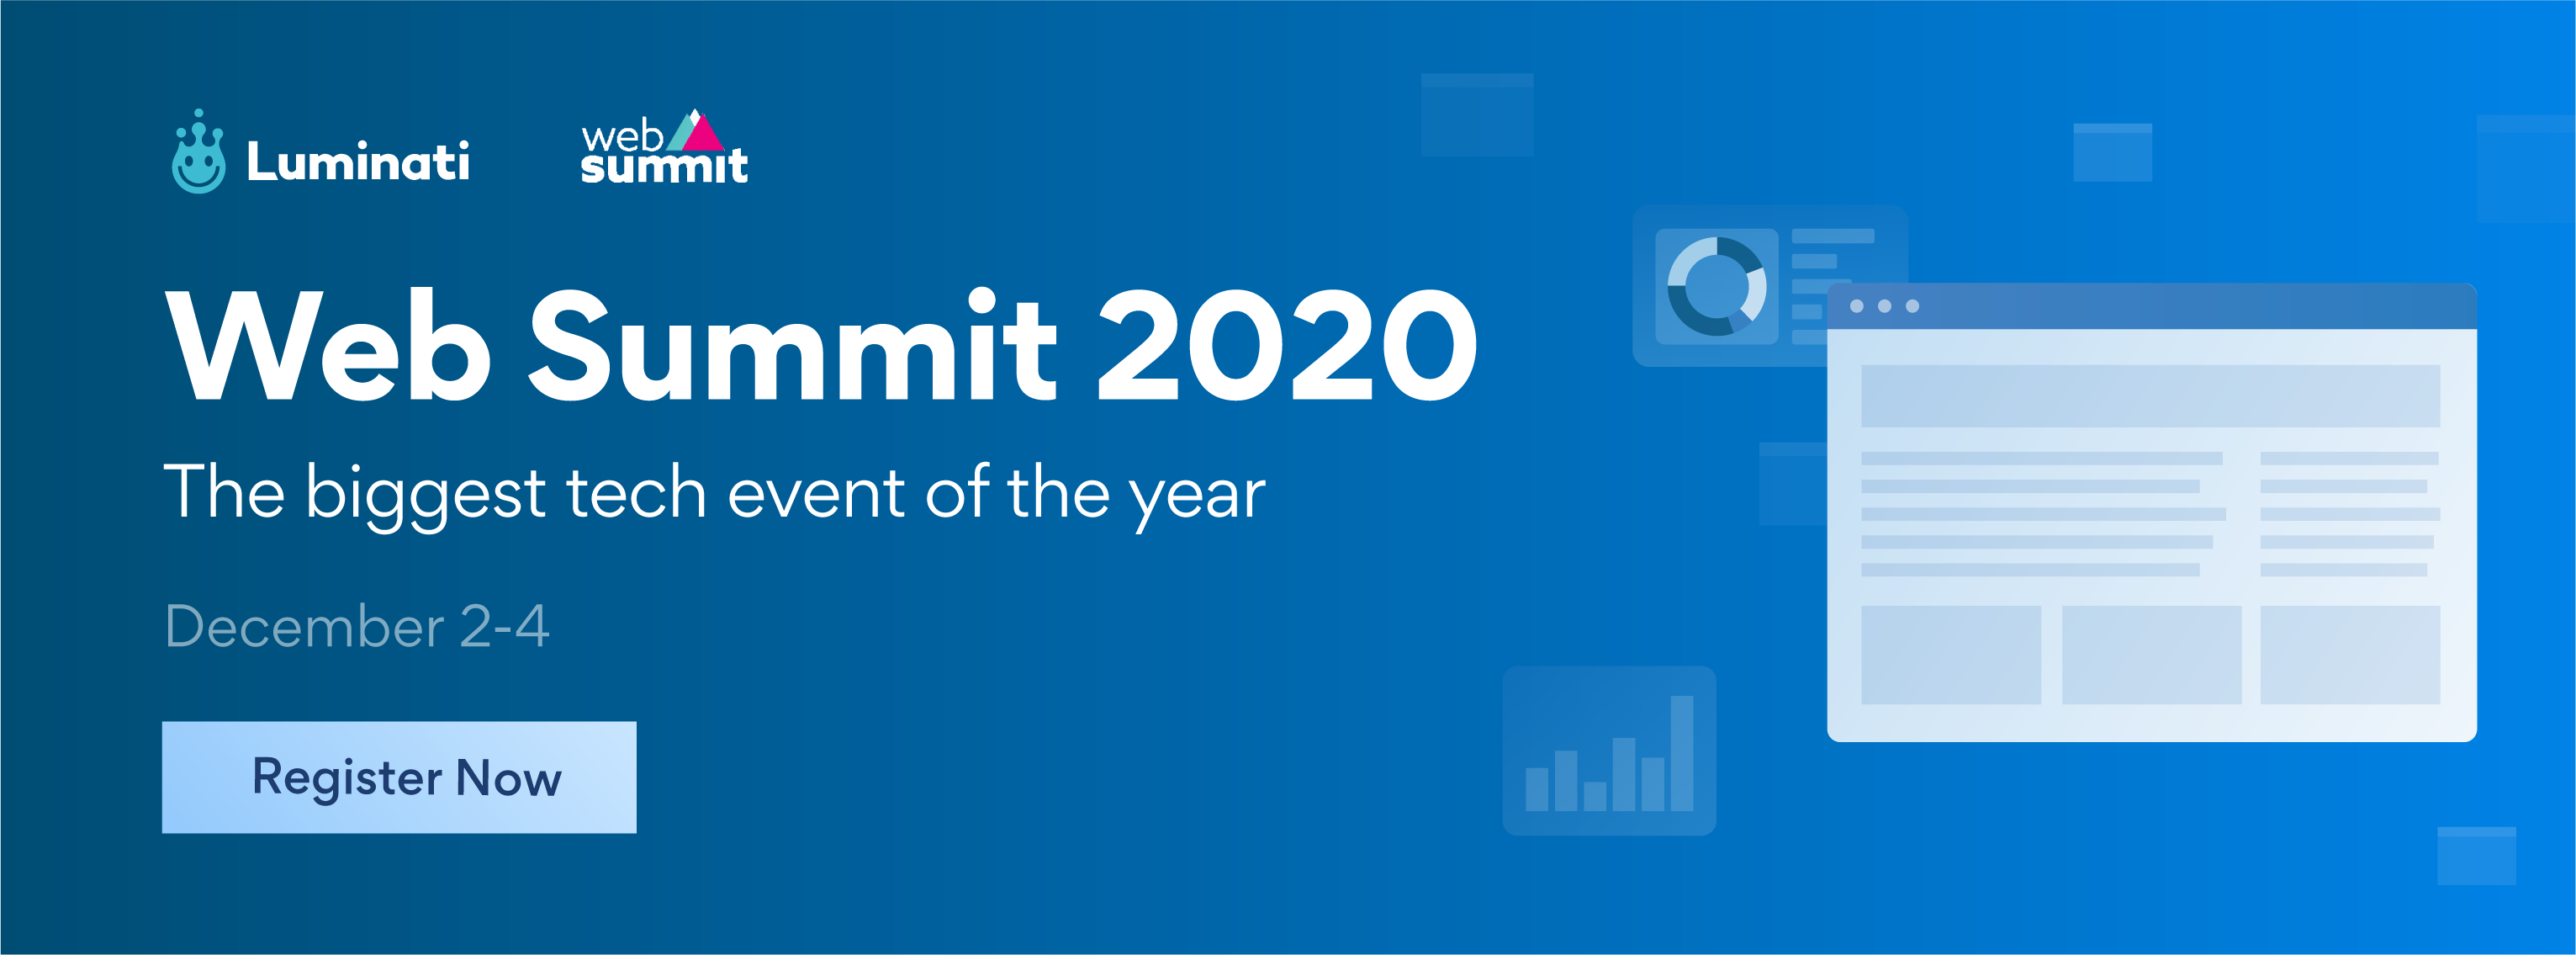 Web Summit 2020 Splash Banner - The Biggest Tech Event Of The Year